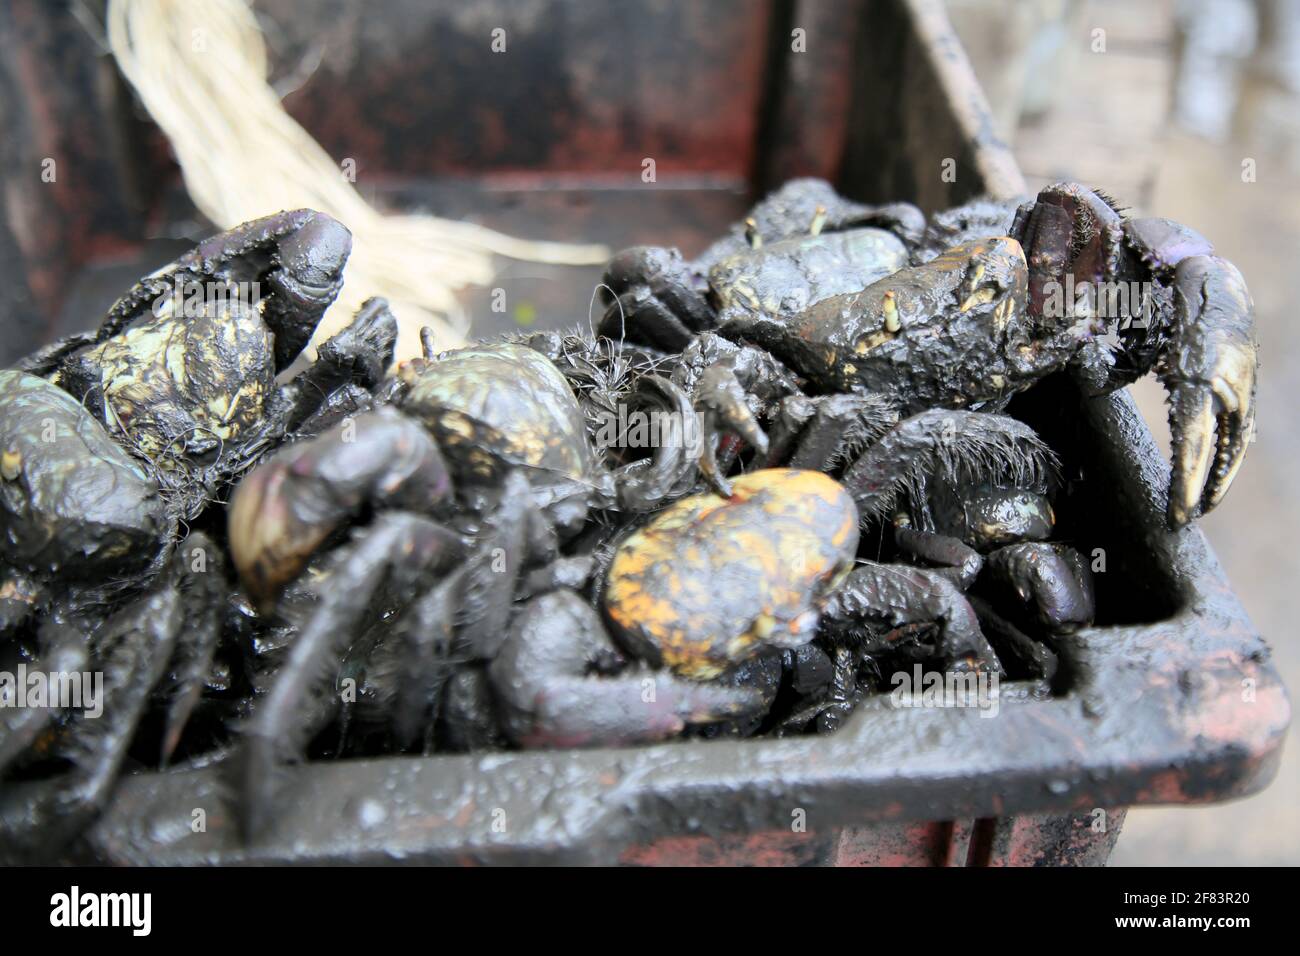 salvador, bahia, brazil - january 19, 2021: uca crab - Ucides cordatus - is seen for sale at the Sao Joaquim fair in the city of Salvador. Stock Photo